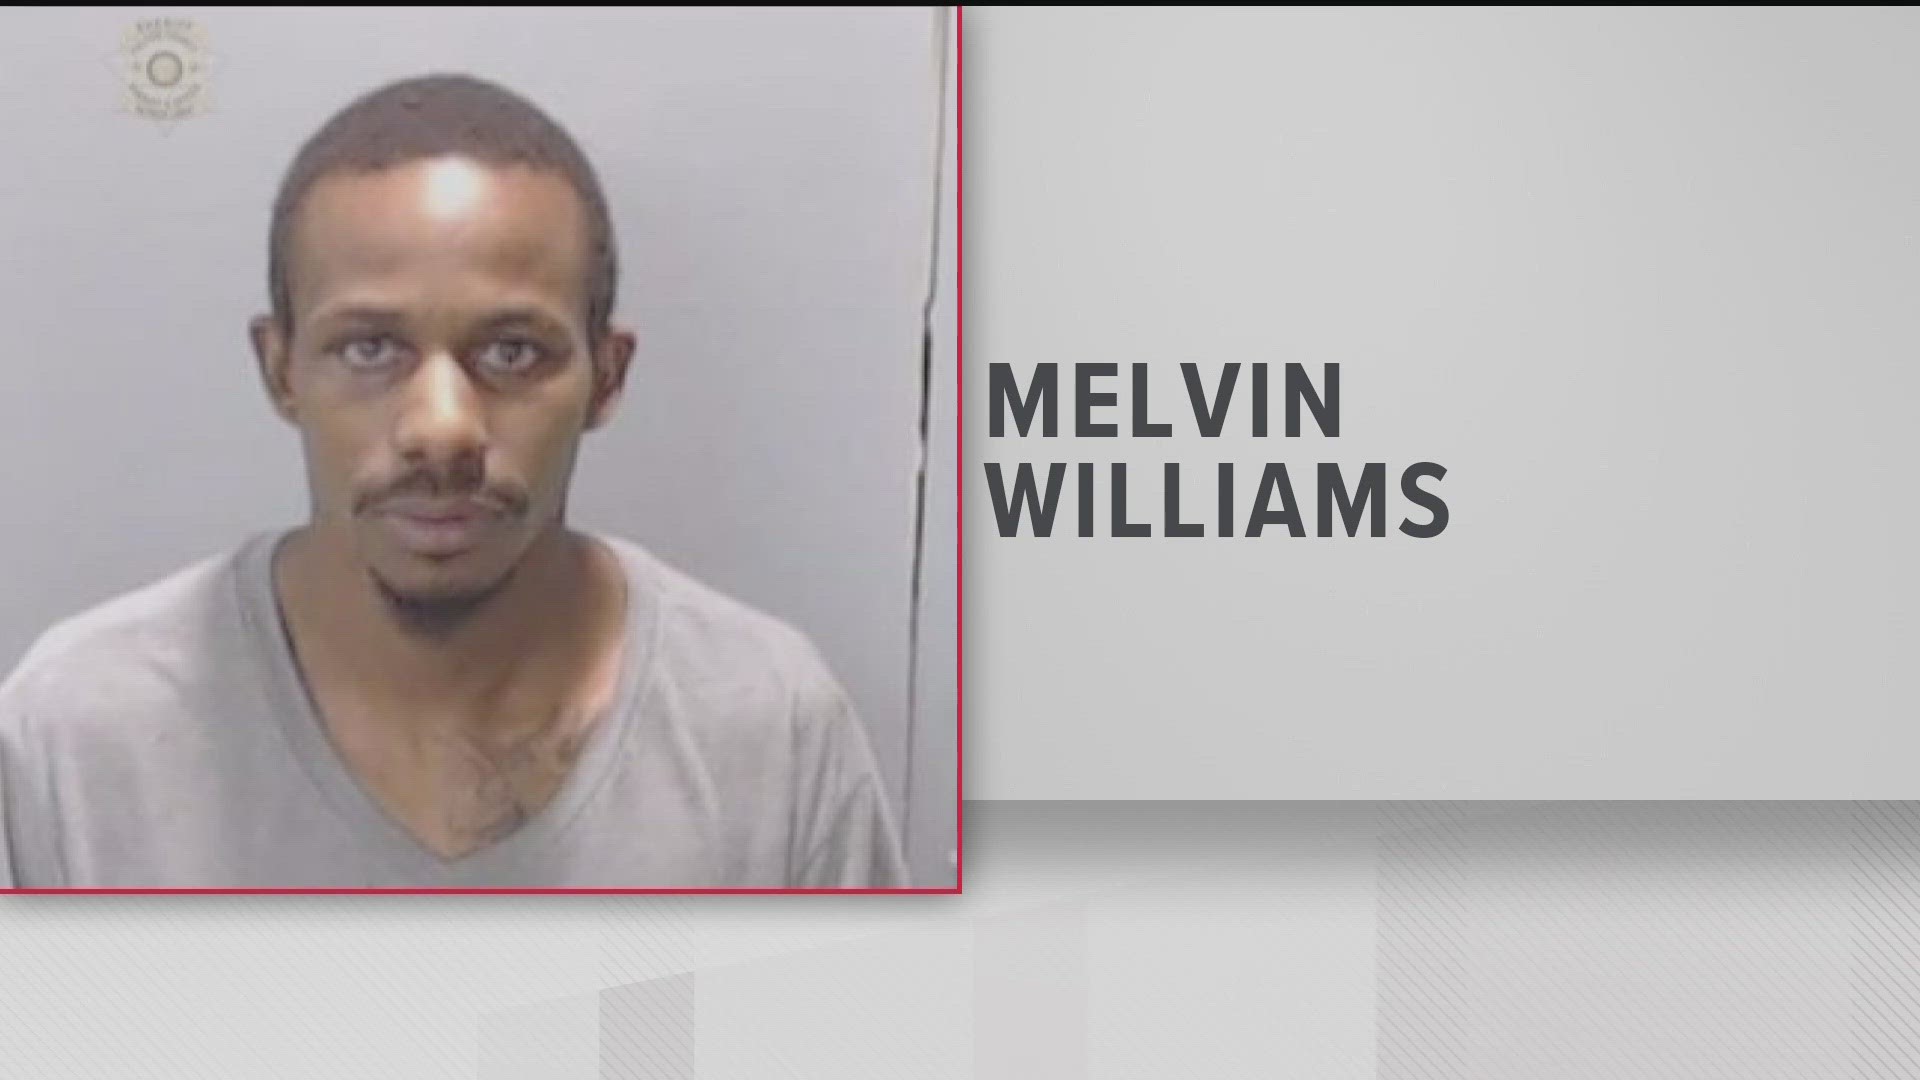 The man was agitated about the mishap on the order and allegedly fired at Subway employees.